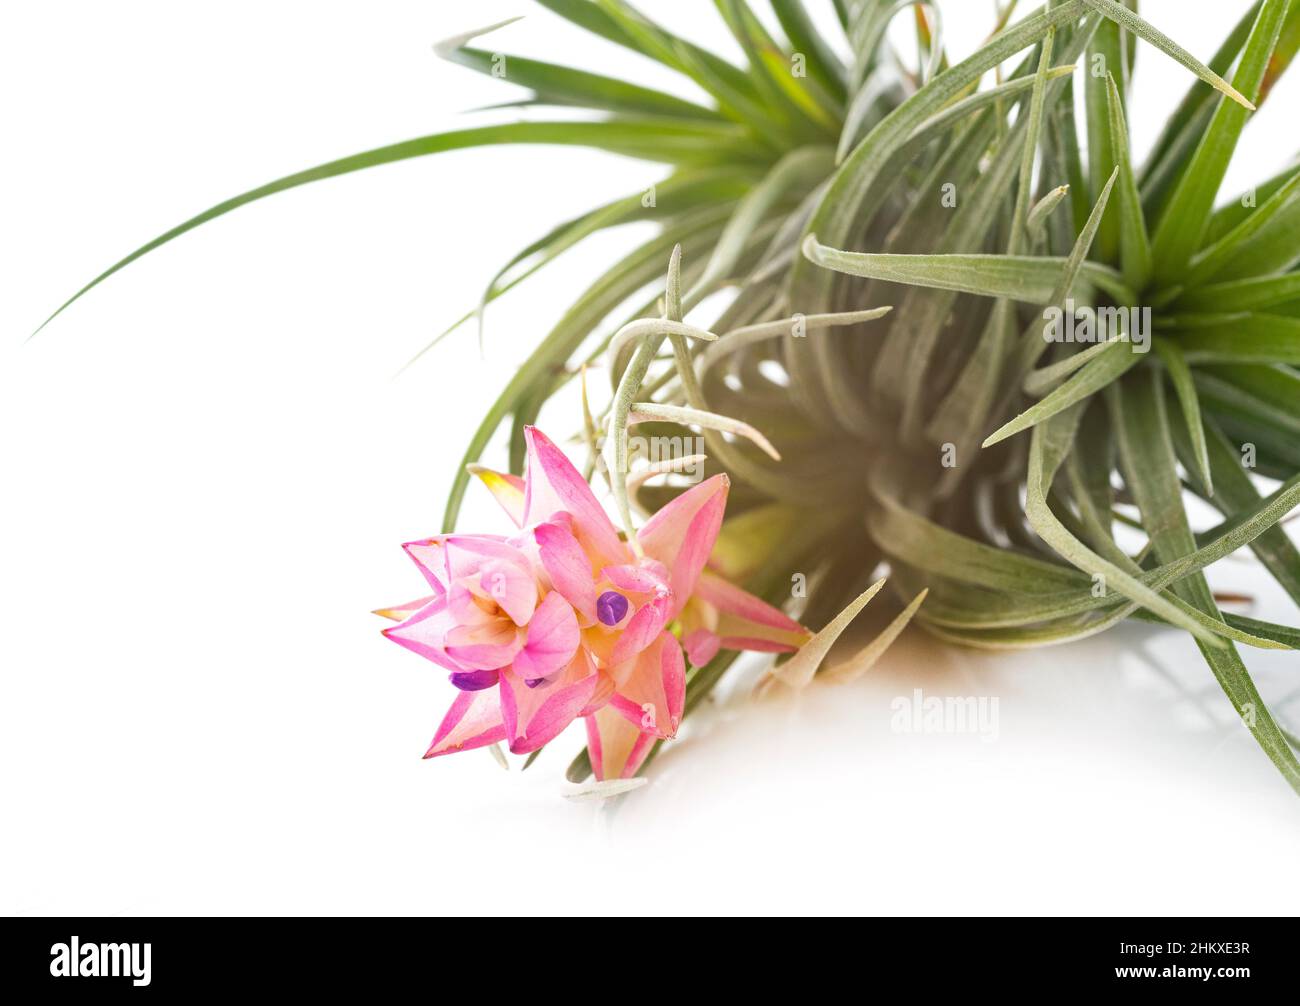 tillandsia plant in front of white background Stock Photo